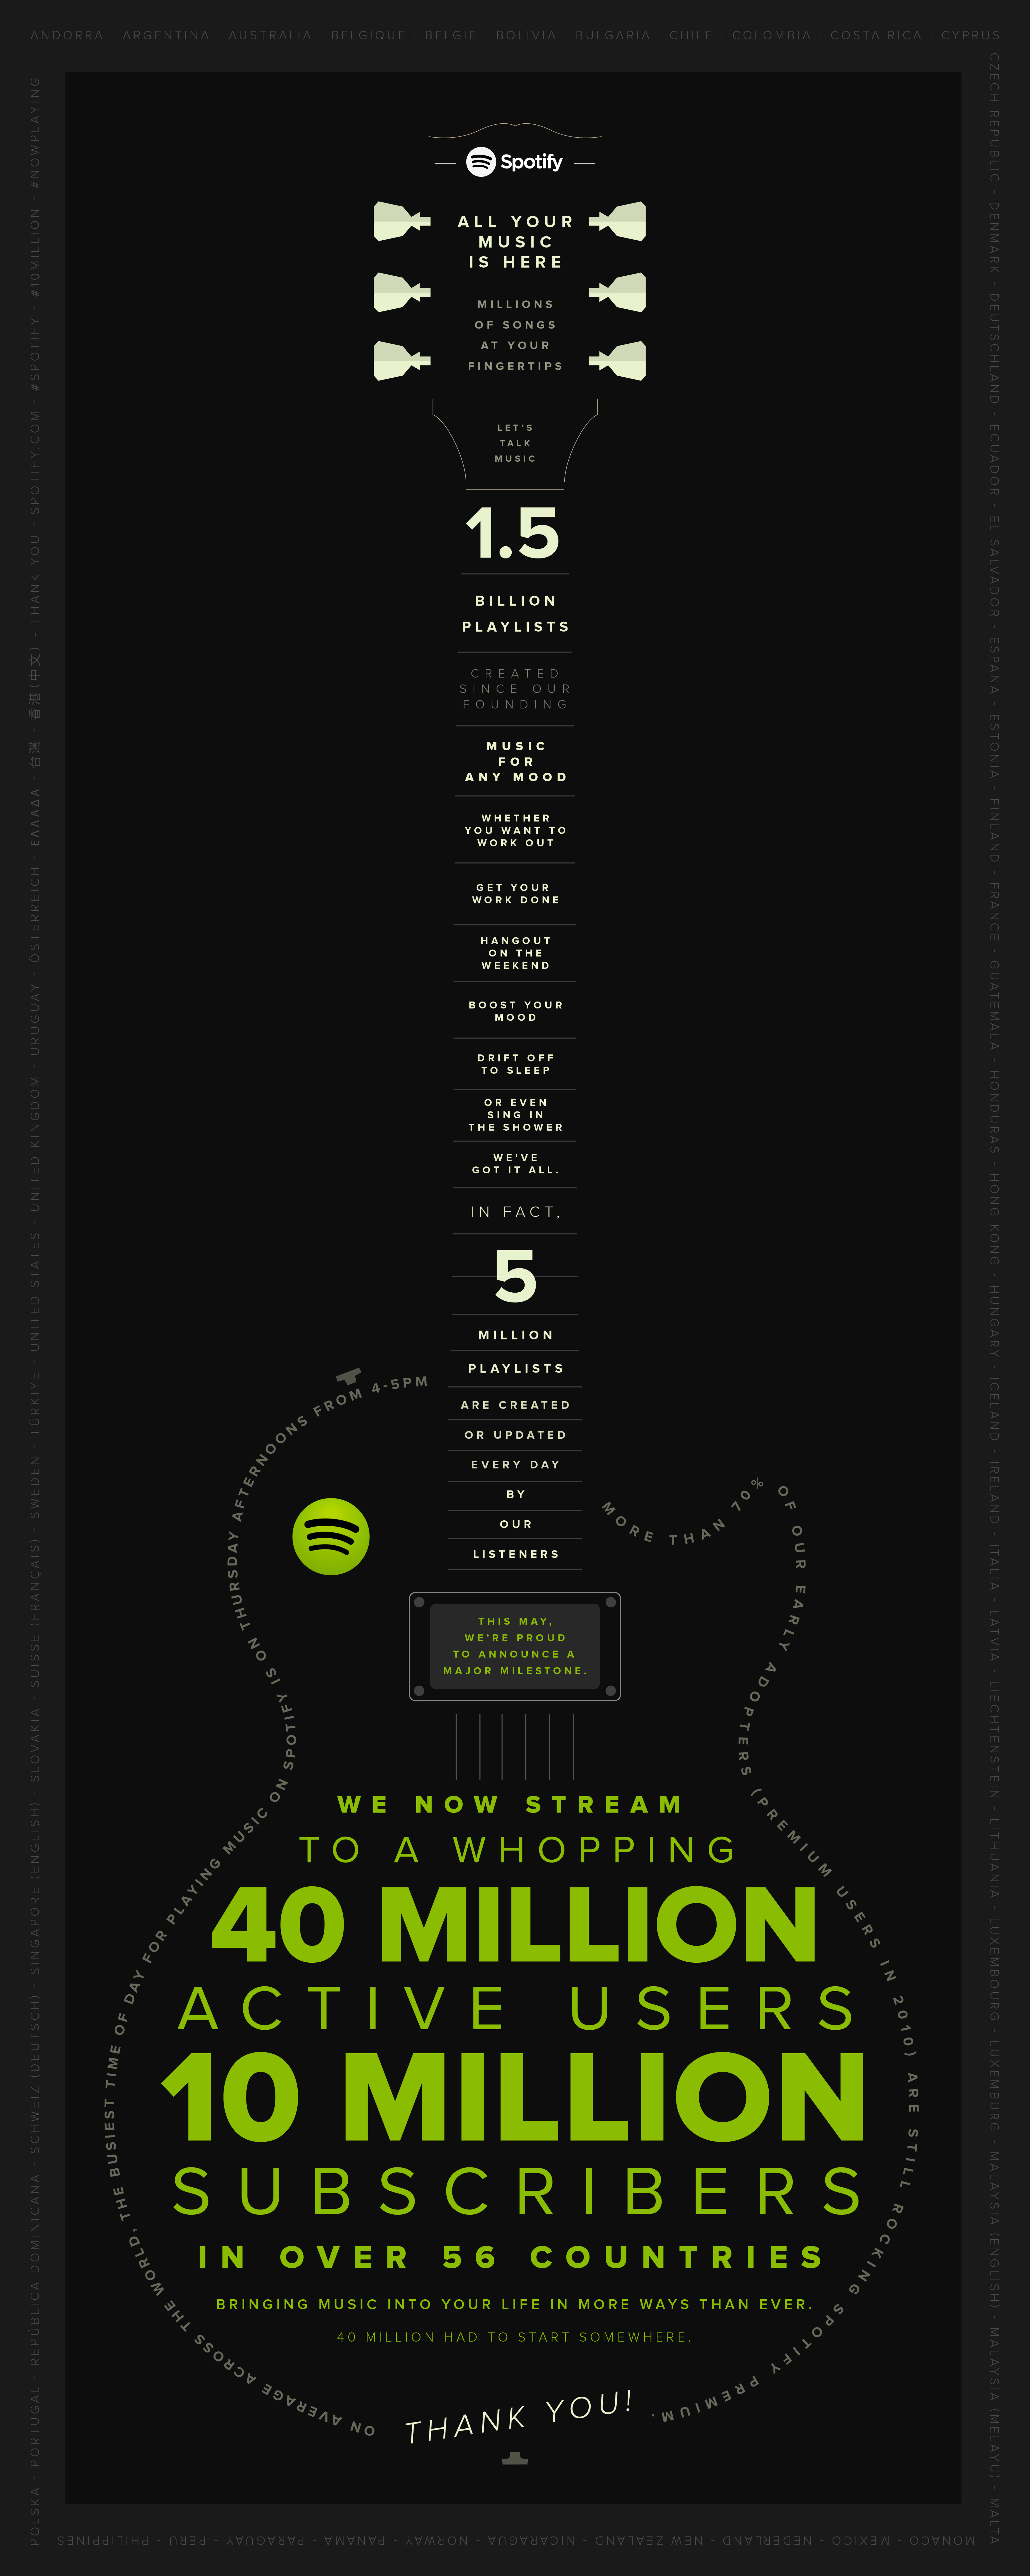 Spotify Reaches 10 Million Global Subscribers, 40 Million Active Users